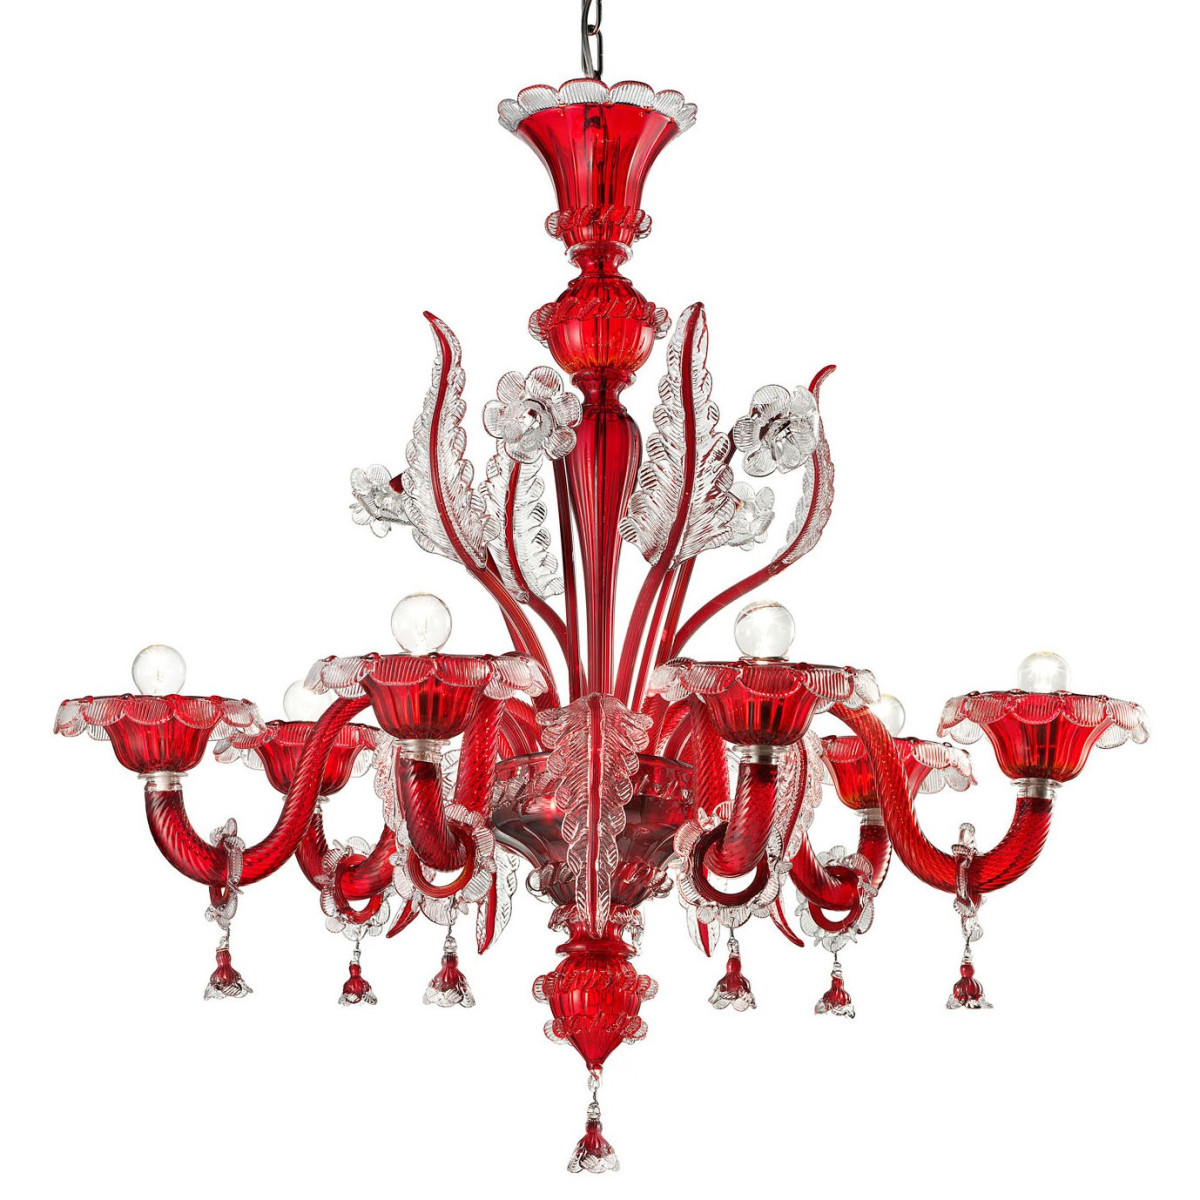 "Santa Lucia" Murano glass chandelier - 6 lights - red with transparent finishes